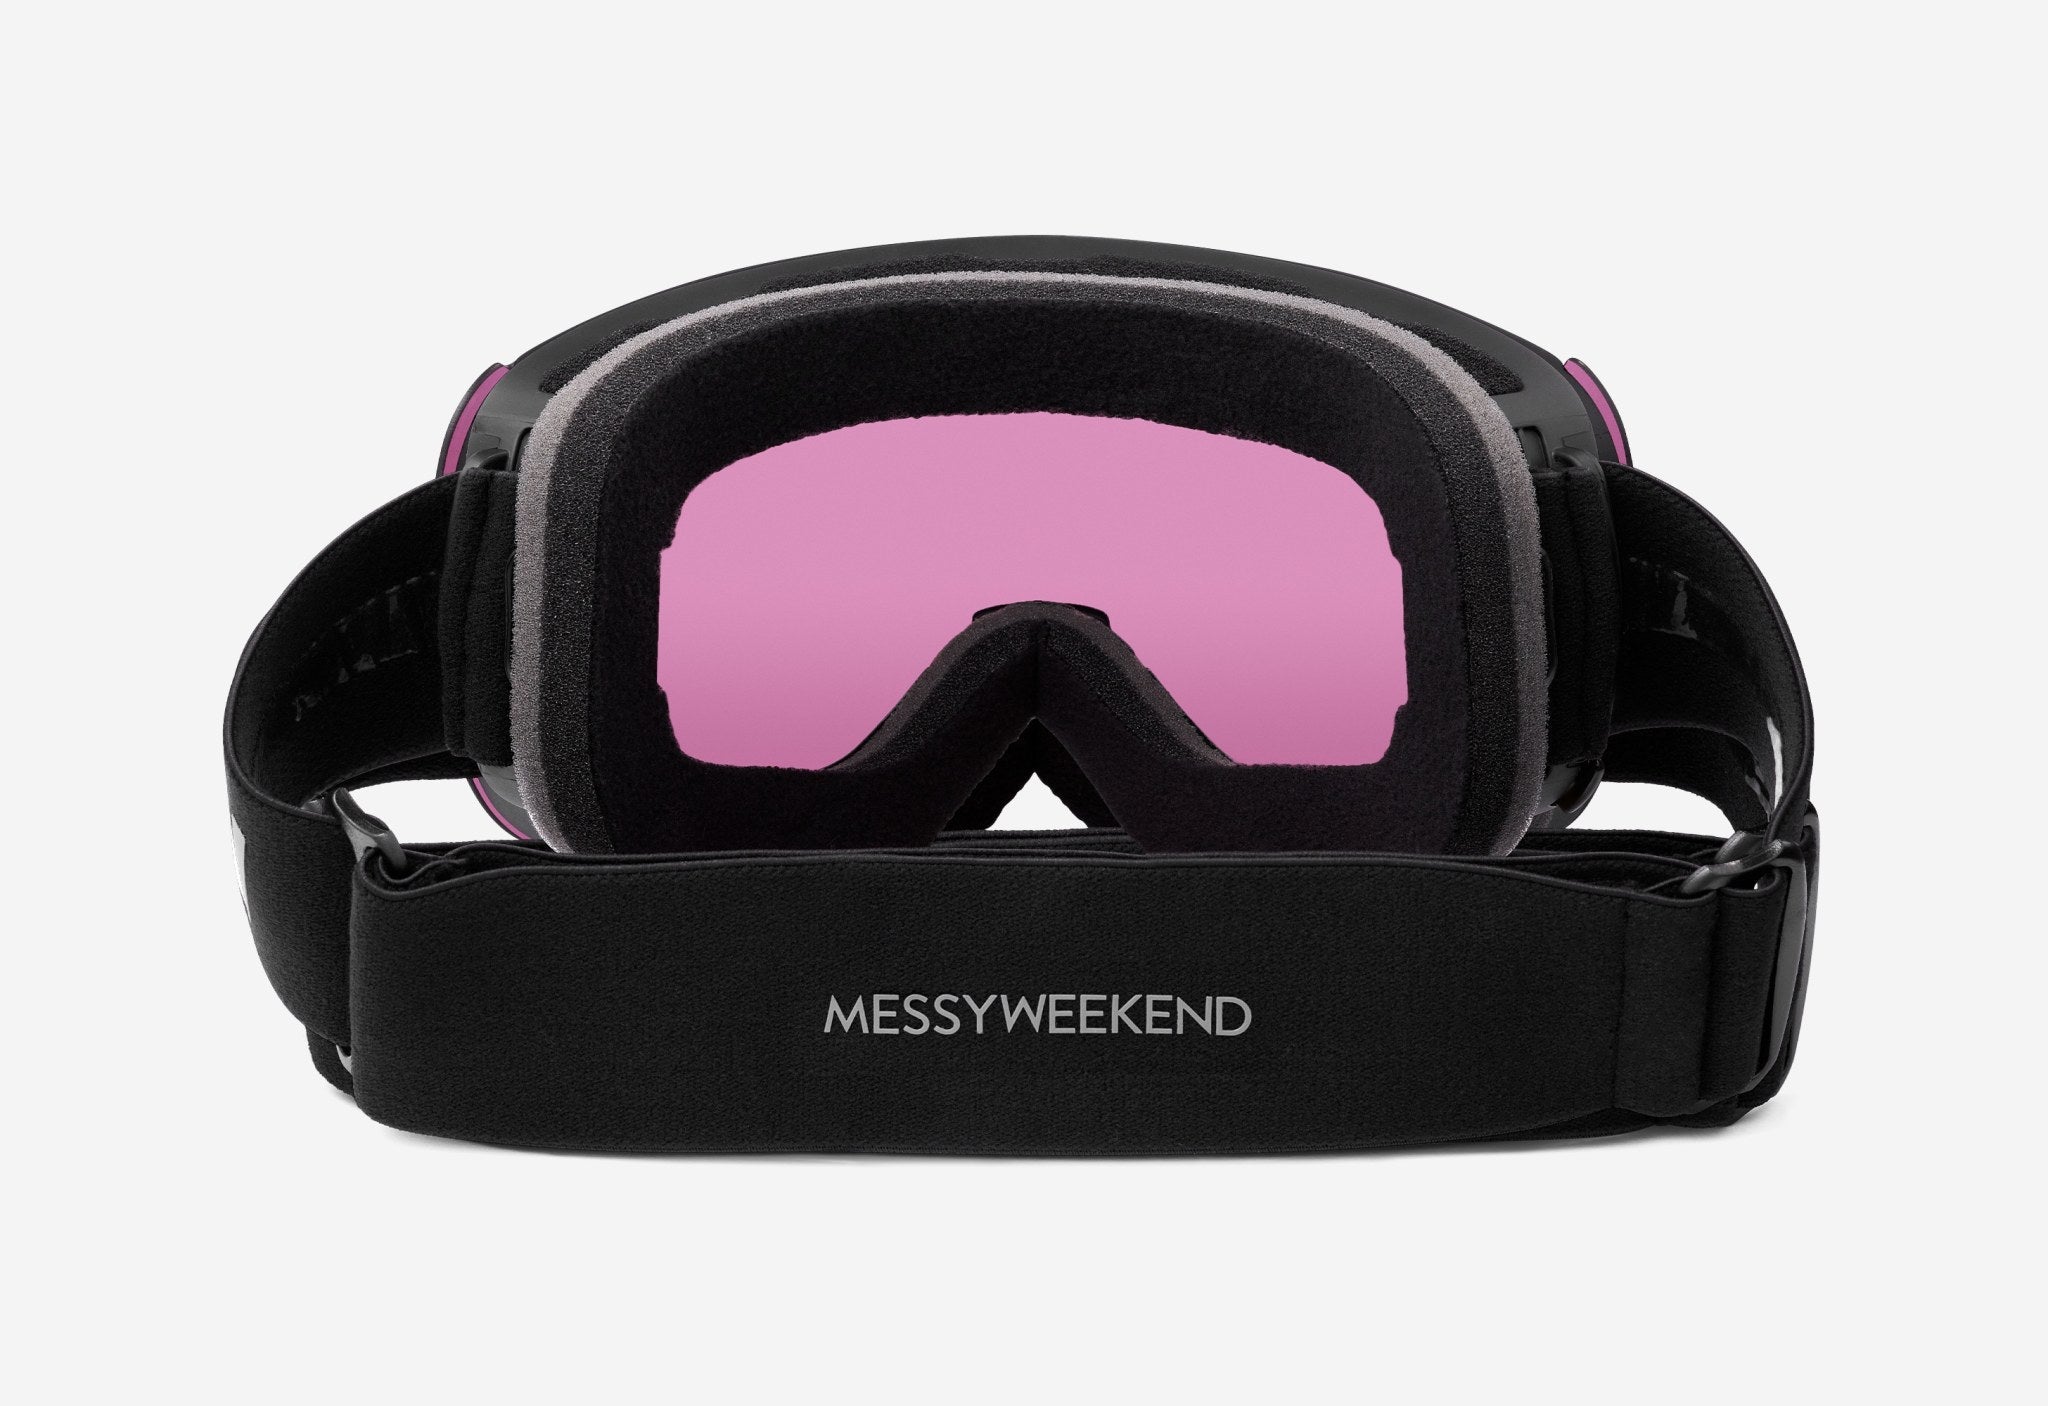 Snow and Ski Goggles mirrored green lens | MessyWeekend